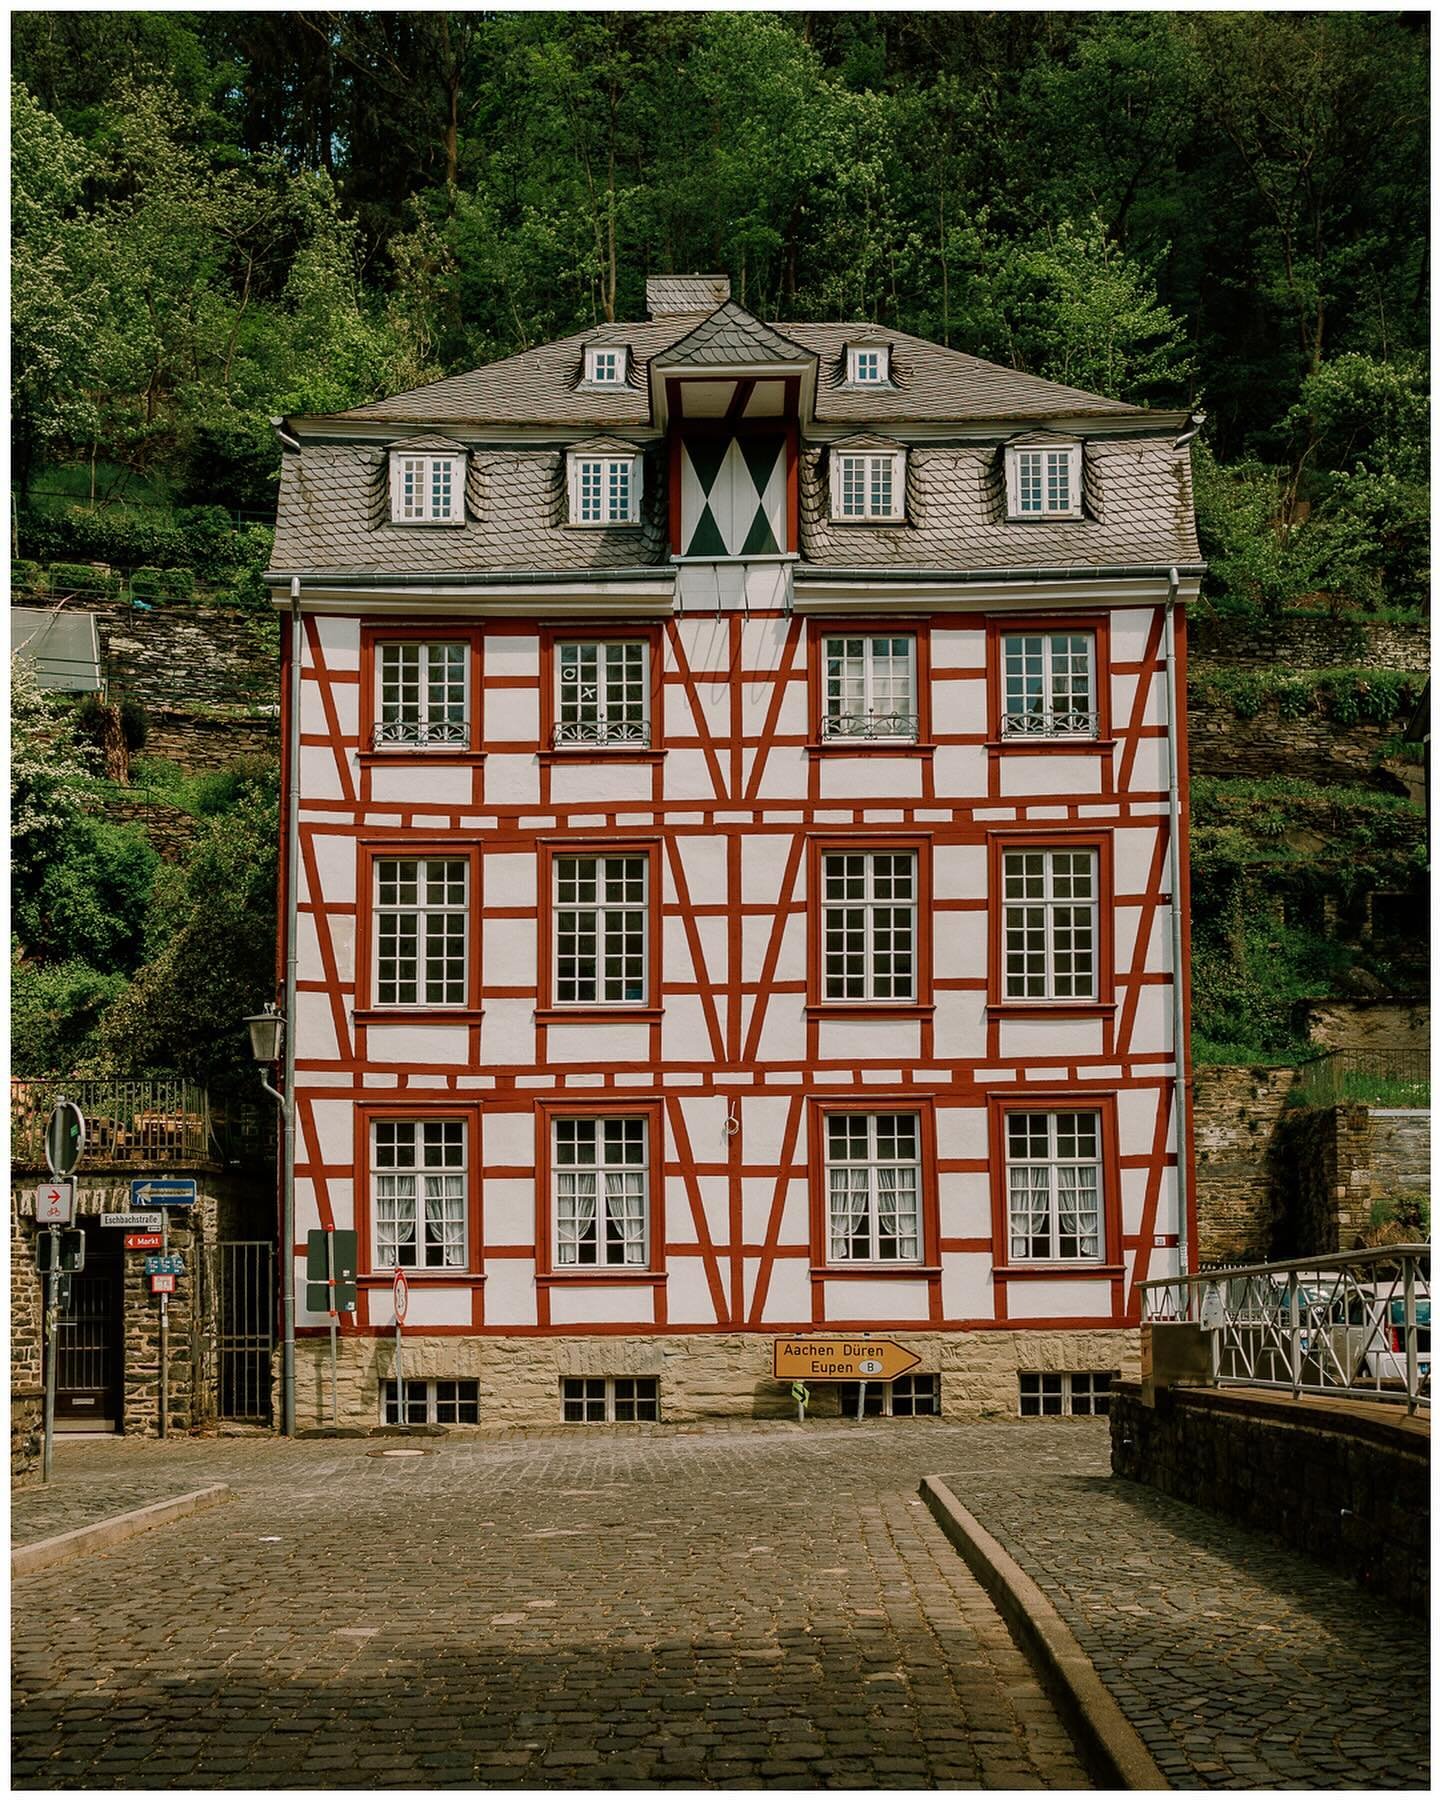 Greetings from Monschau. 

This little town is located in the Eifel National Park near the Belgian border and it&rsquo;s totally worth a visit. The charming old buildings convey a feeling of the Middle Ages. 

Totally recommend it for a short trip or